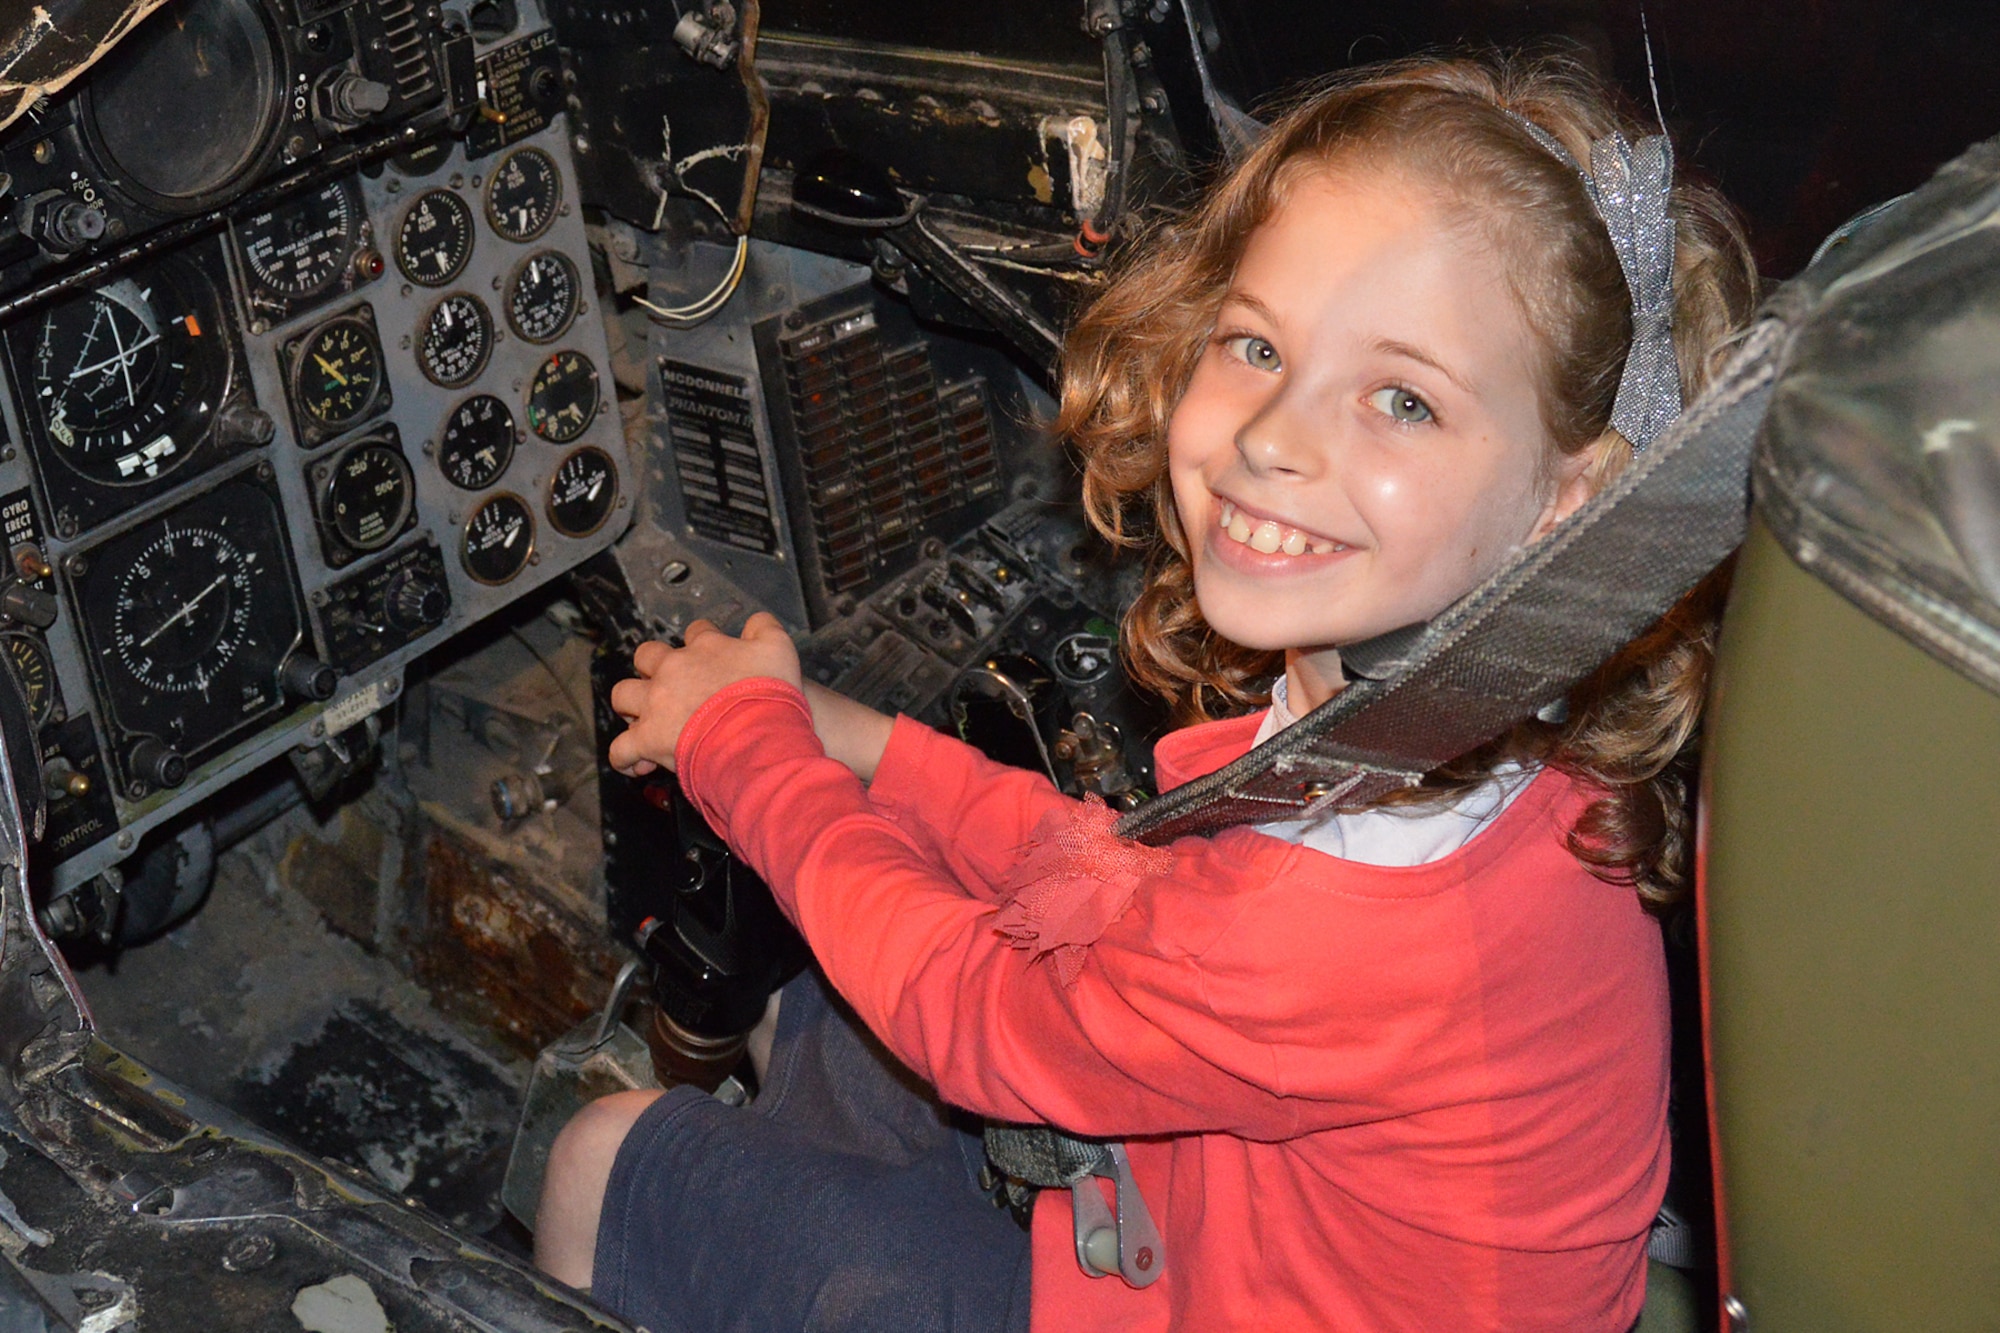 DAYTON, Ohio - A museum visitor enjoying the F-4D Phantom II Sit-in Cockpit in the Cold War Gallery at the National Museum of the U.S. Air Force. (U.S. Air Force photo)